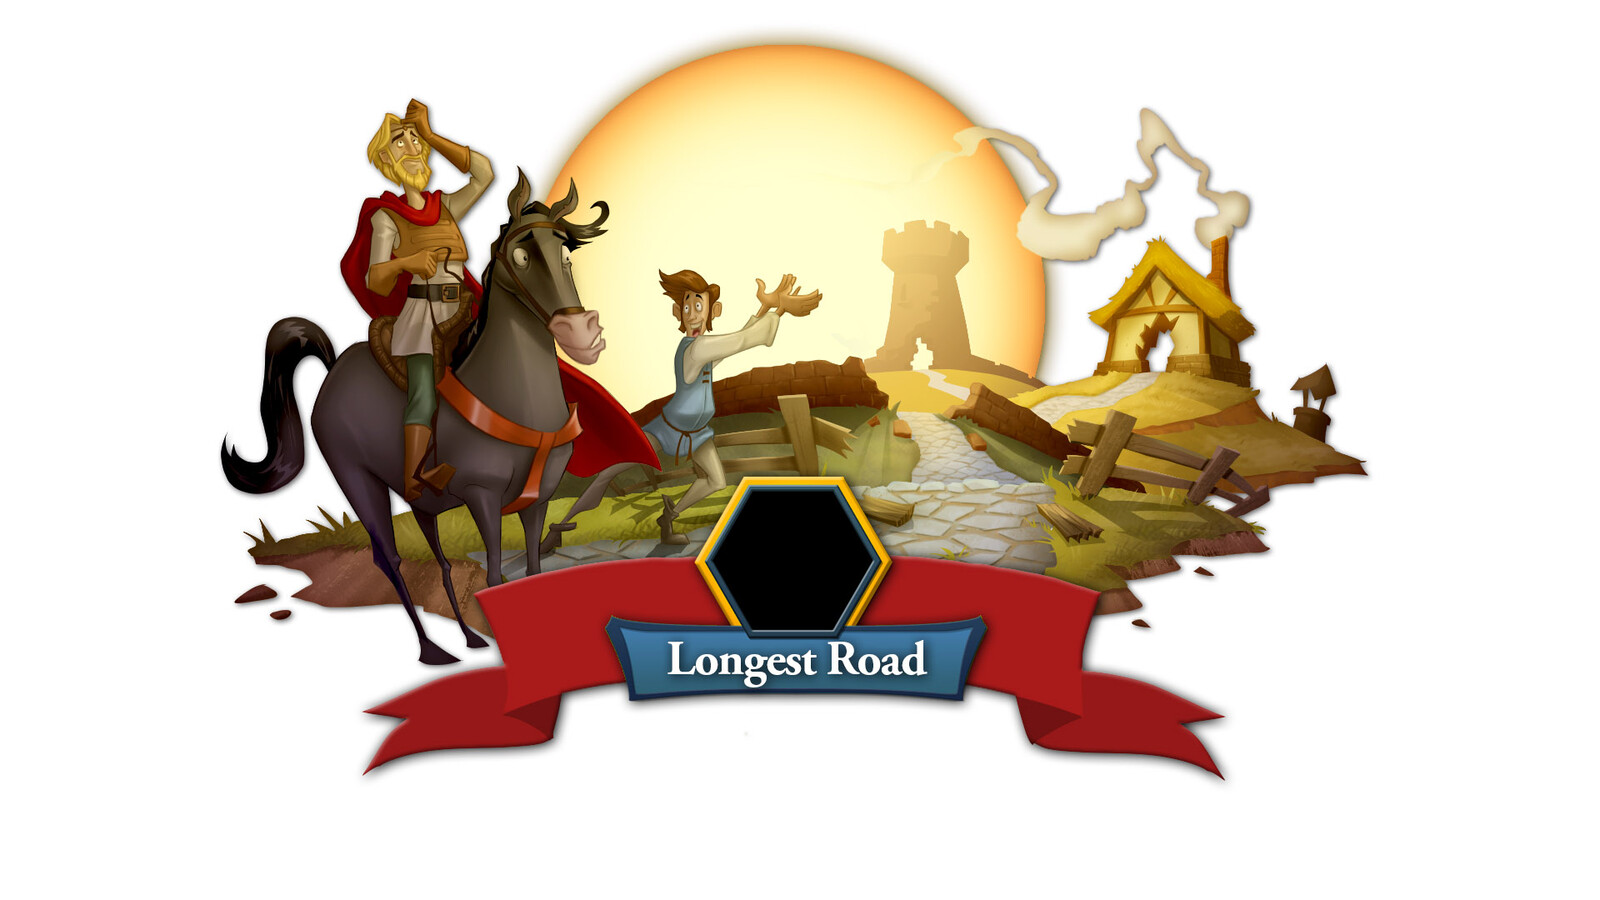 This is a pop-up for the Longest Road achievement.